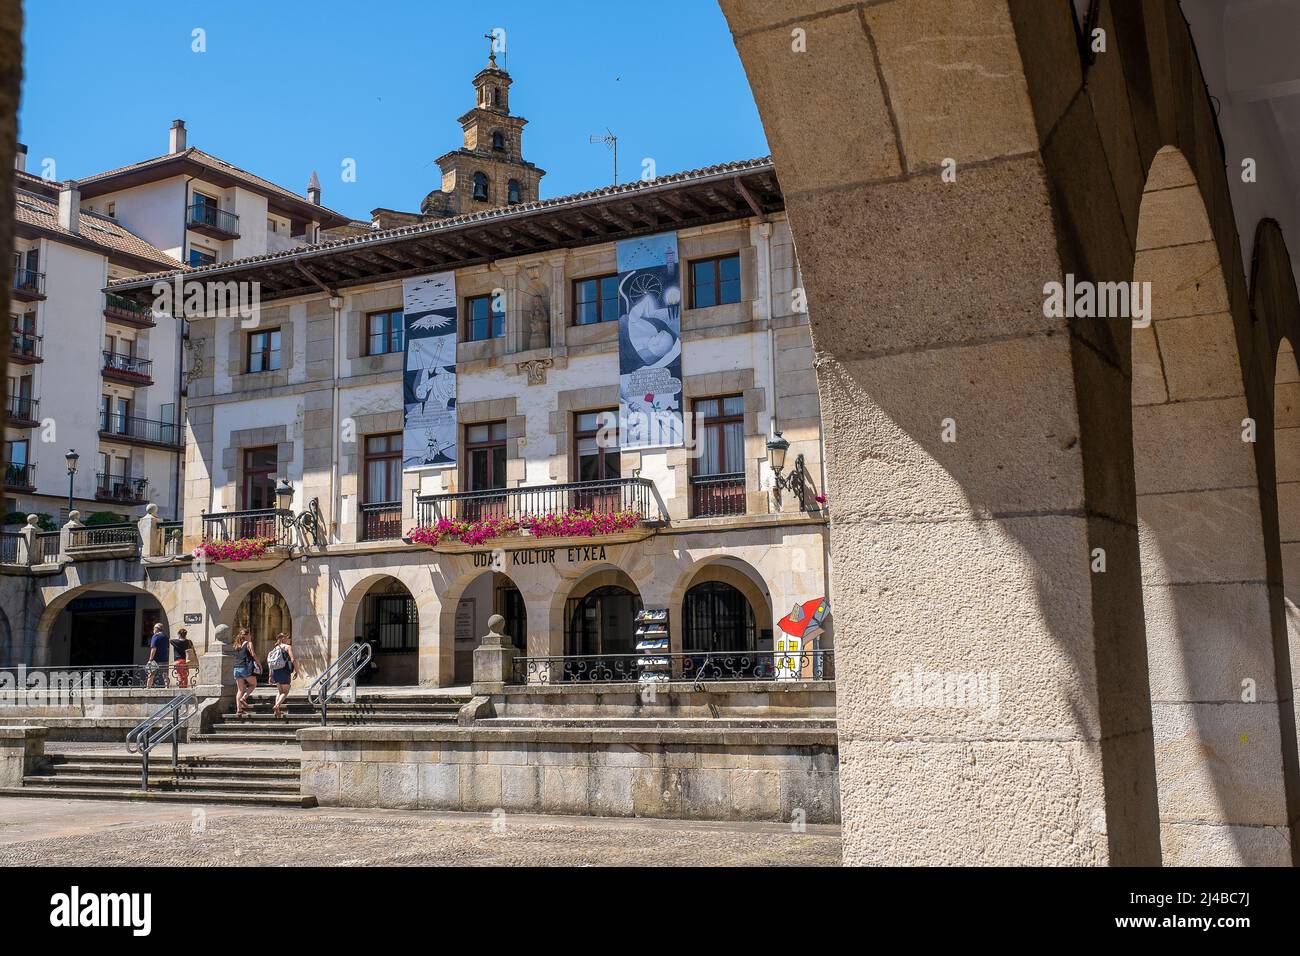 Culture House In Plaza Of The Jurisdictions, Gernika-Lumo, Basque Country, Spain Stock Photo